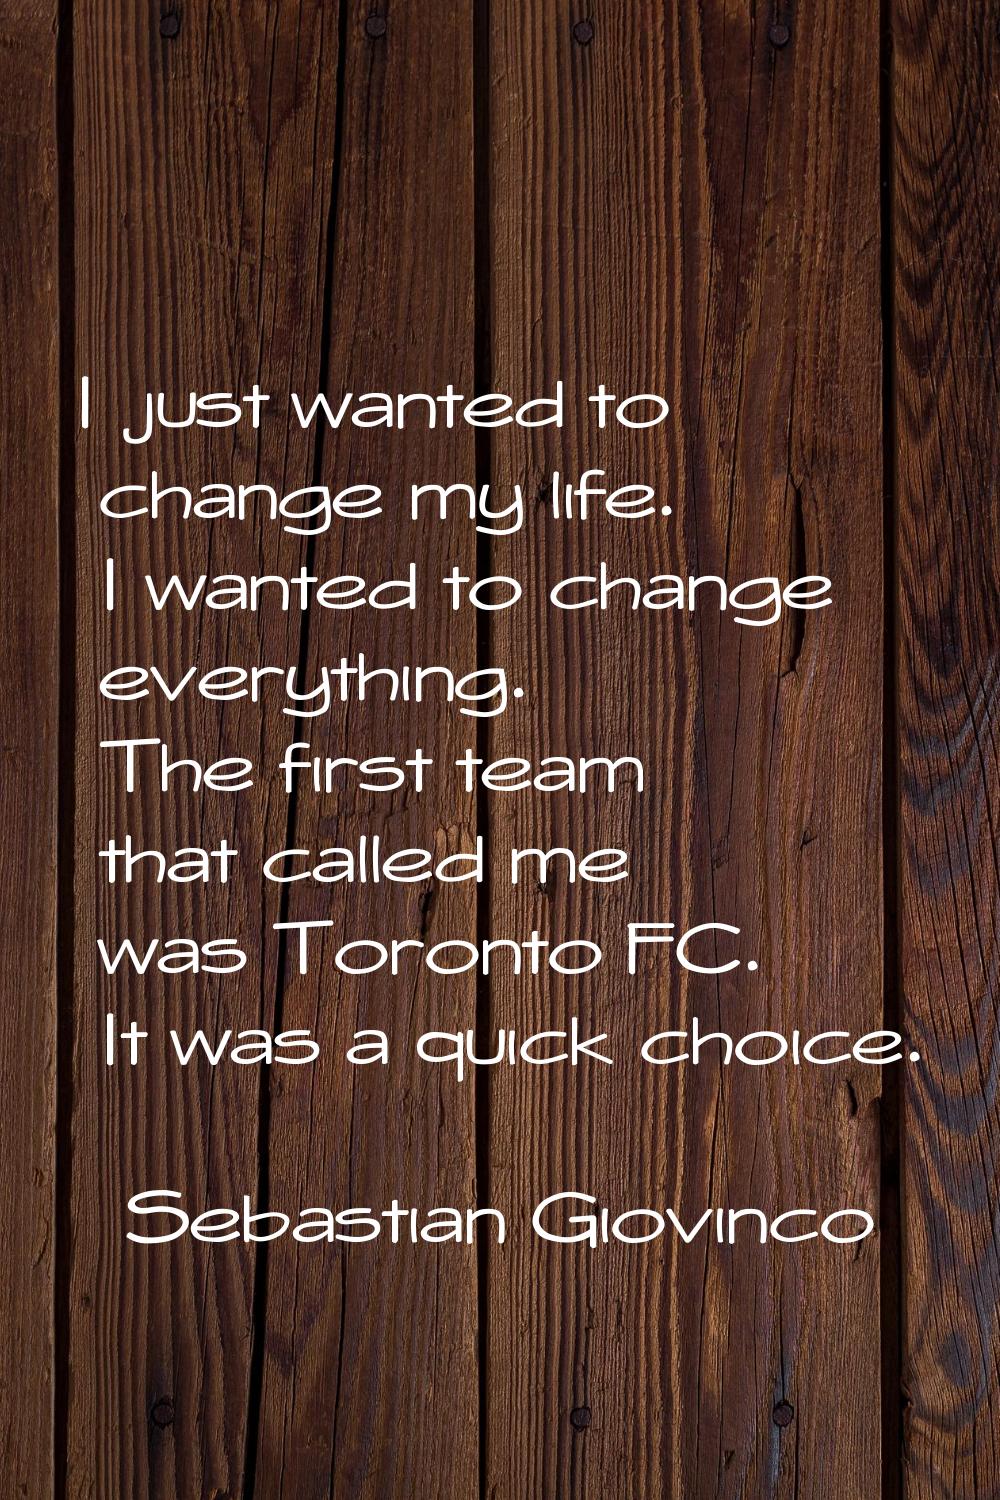 I just wanted to change my life. I wanted to change everything. The first team that called me was T